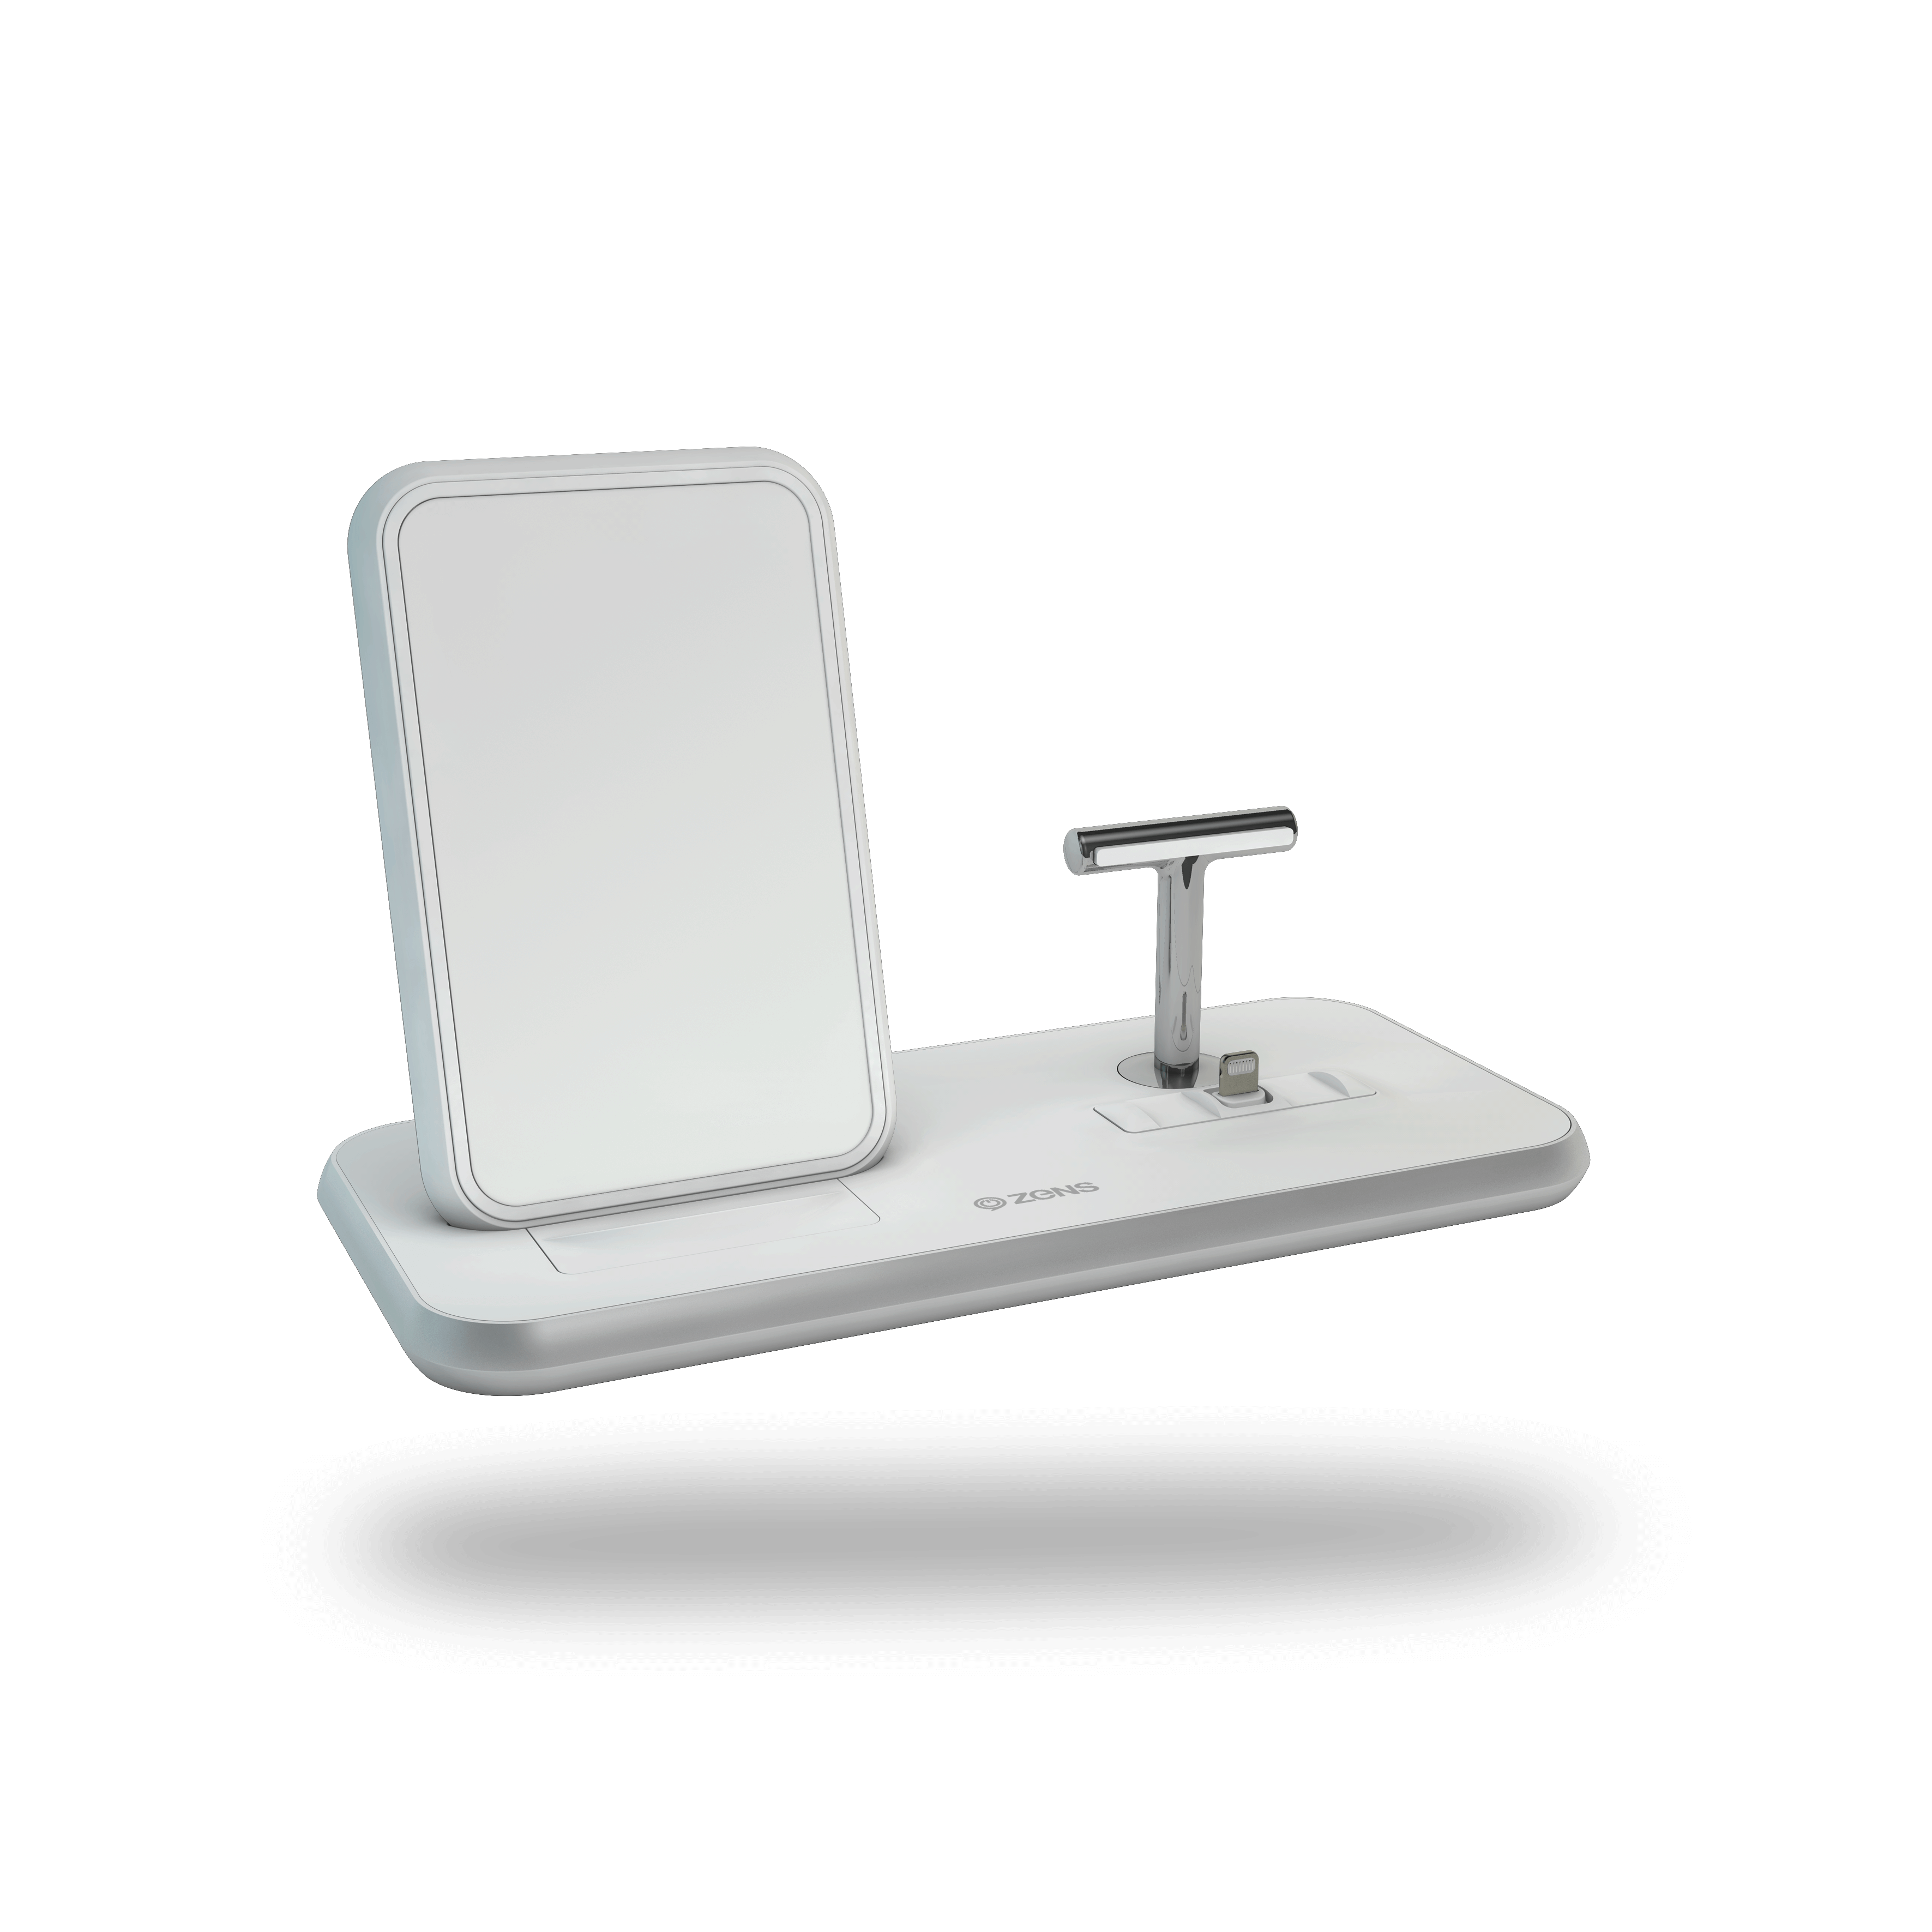 Stand+Dock Aluminium Wireless Charger - White side view